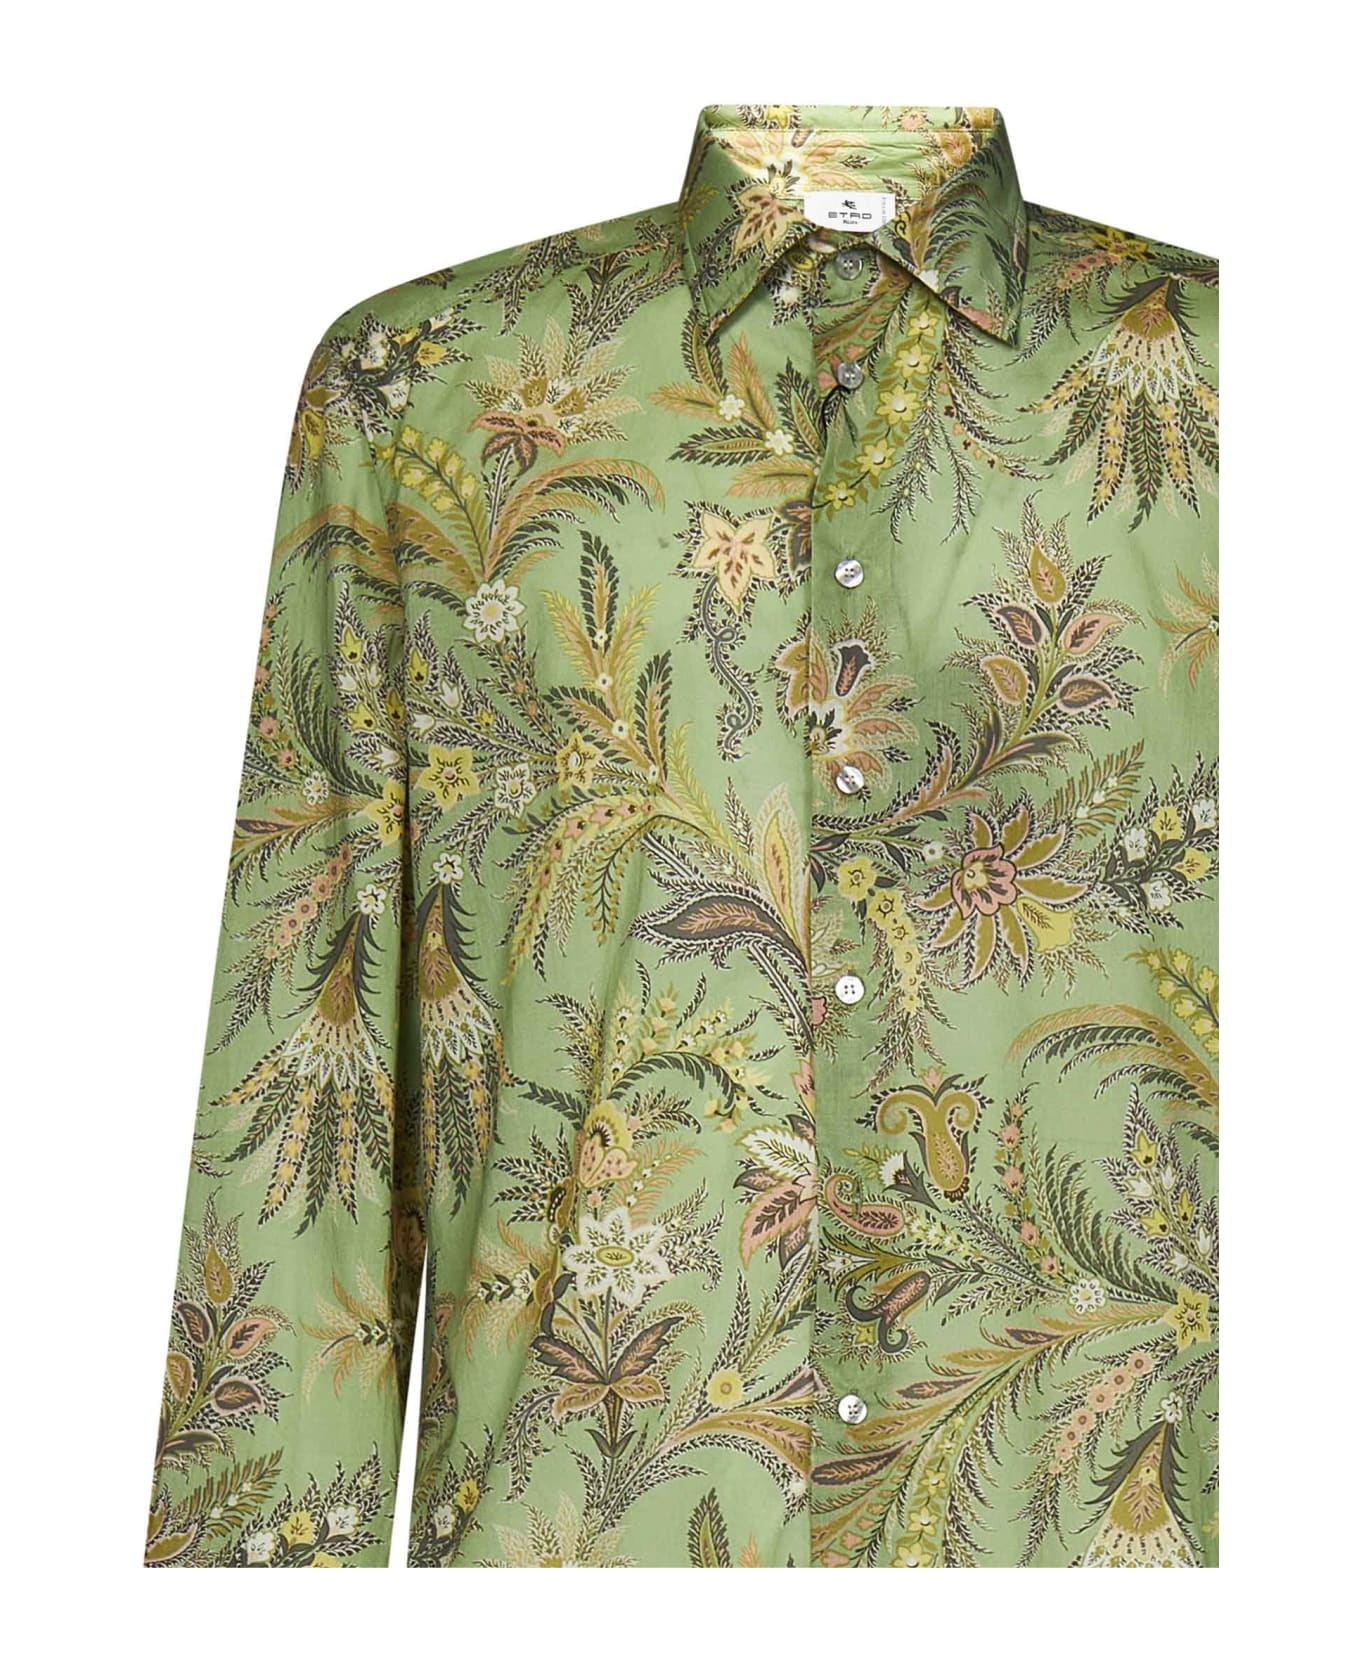 Etro Green Shirt With Paisley Print - Green